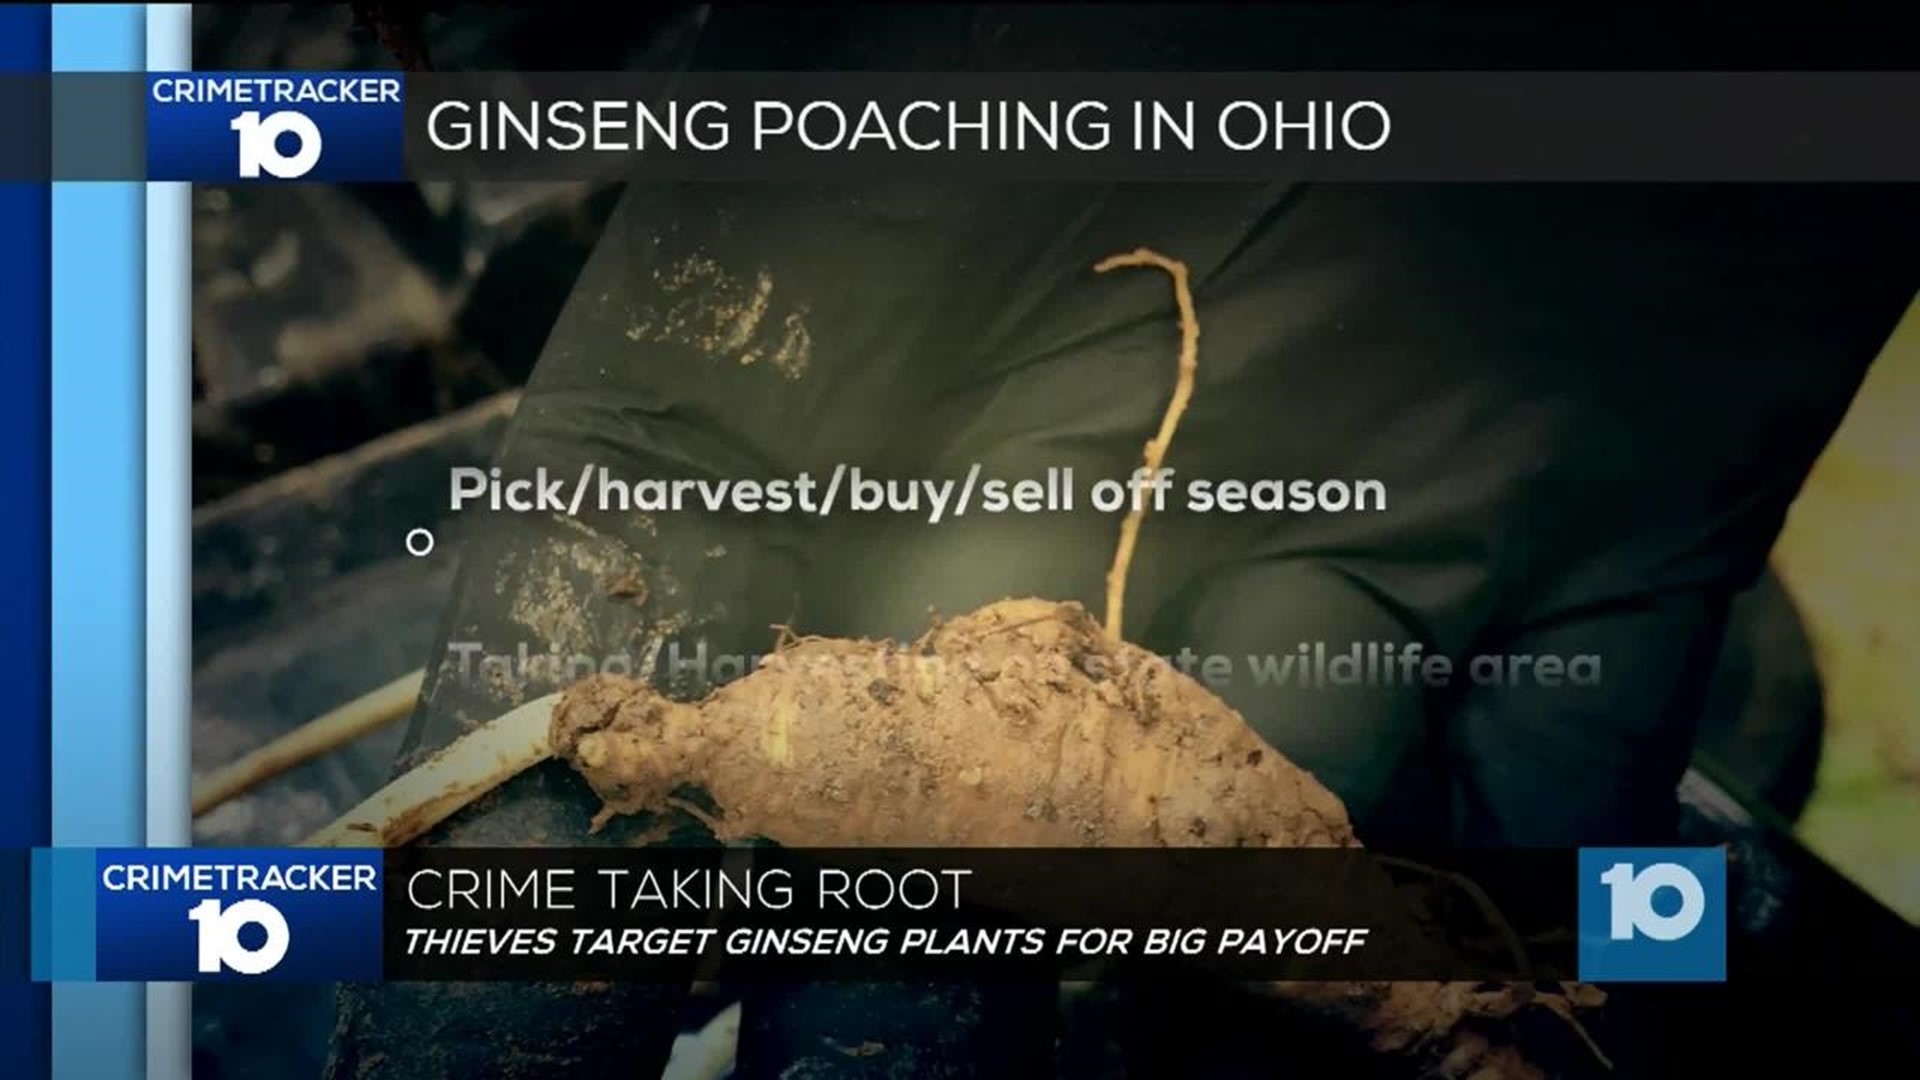 Ohio officials: Criminals turning to ginseng poaching for big payoff